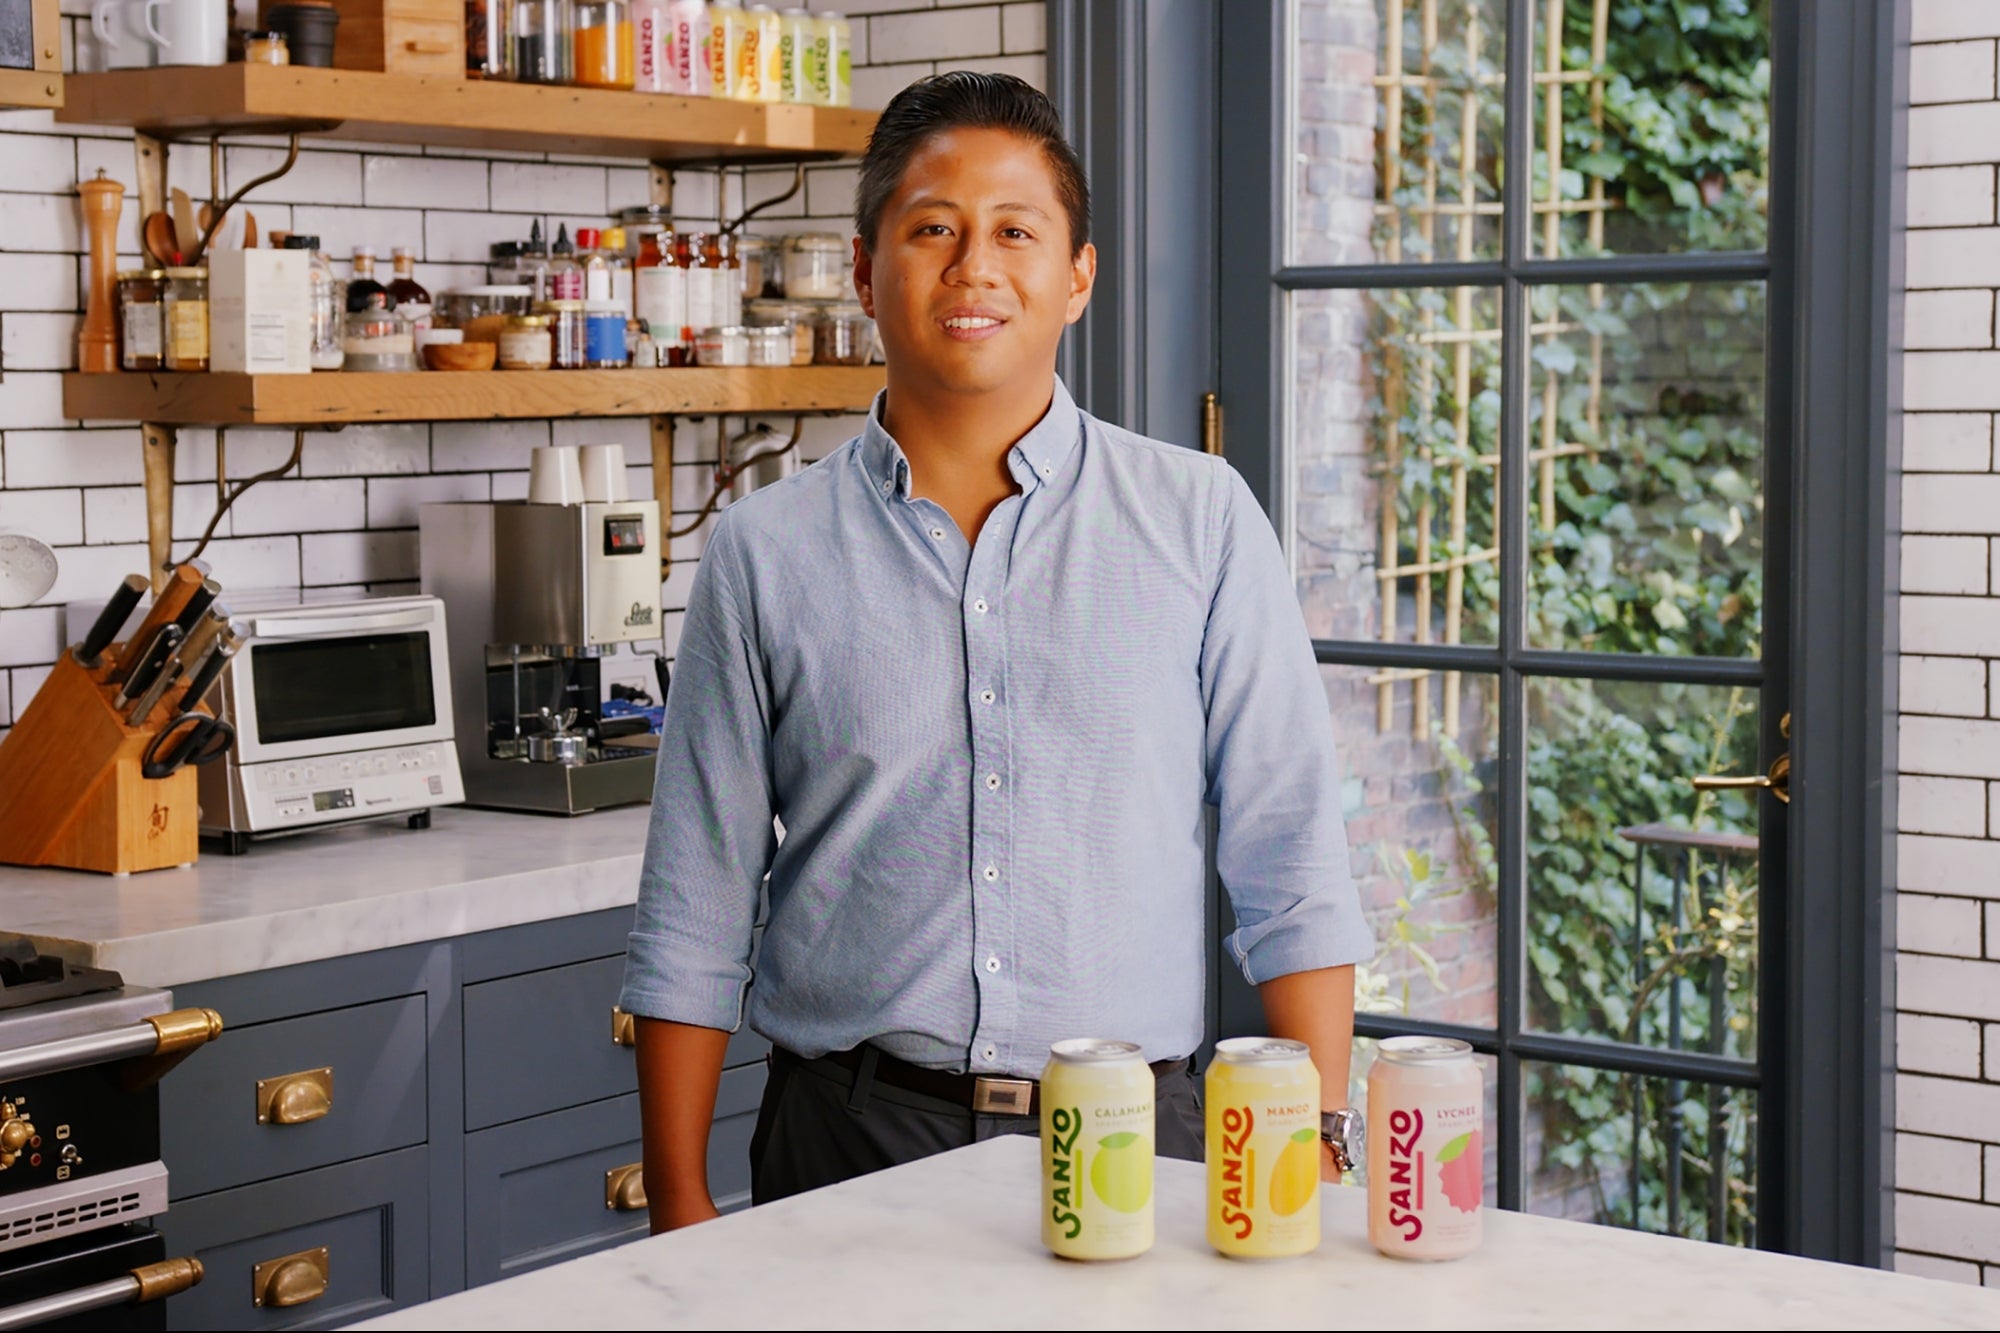 This Filipino American Founder Is Disrupting the Beverage Aisle by Introducing Fresh Flavors to the Crowded Bubbly Water Market